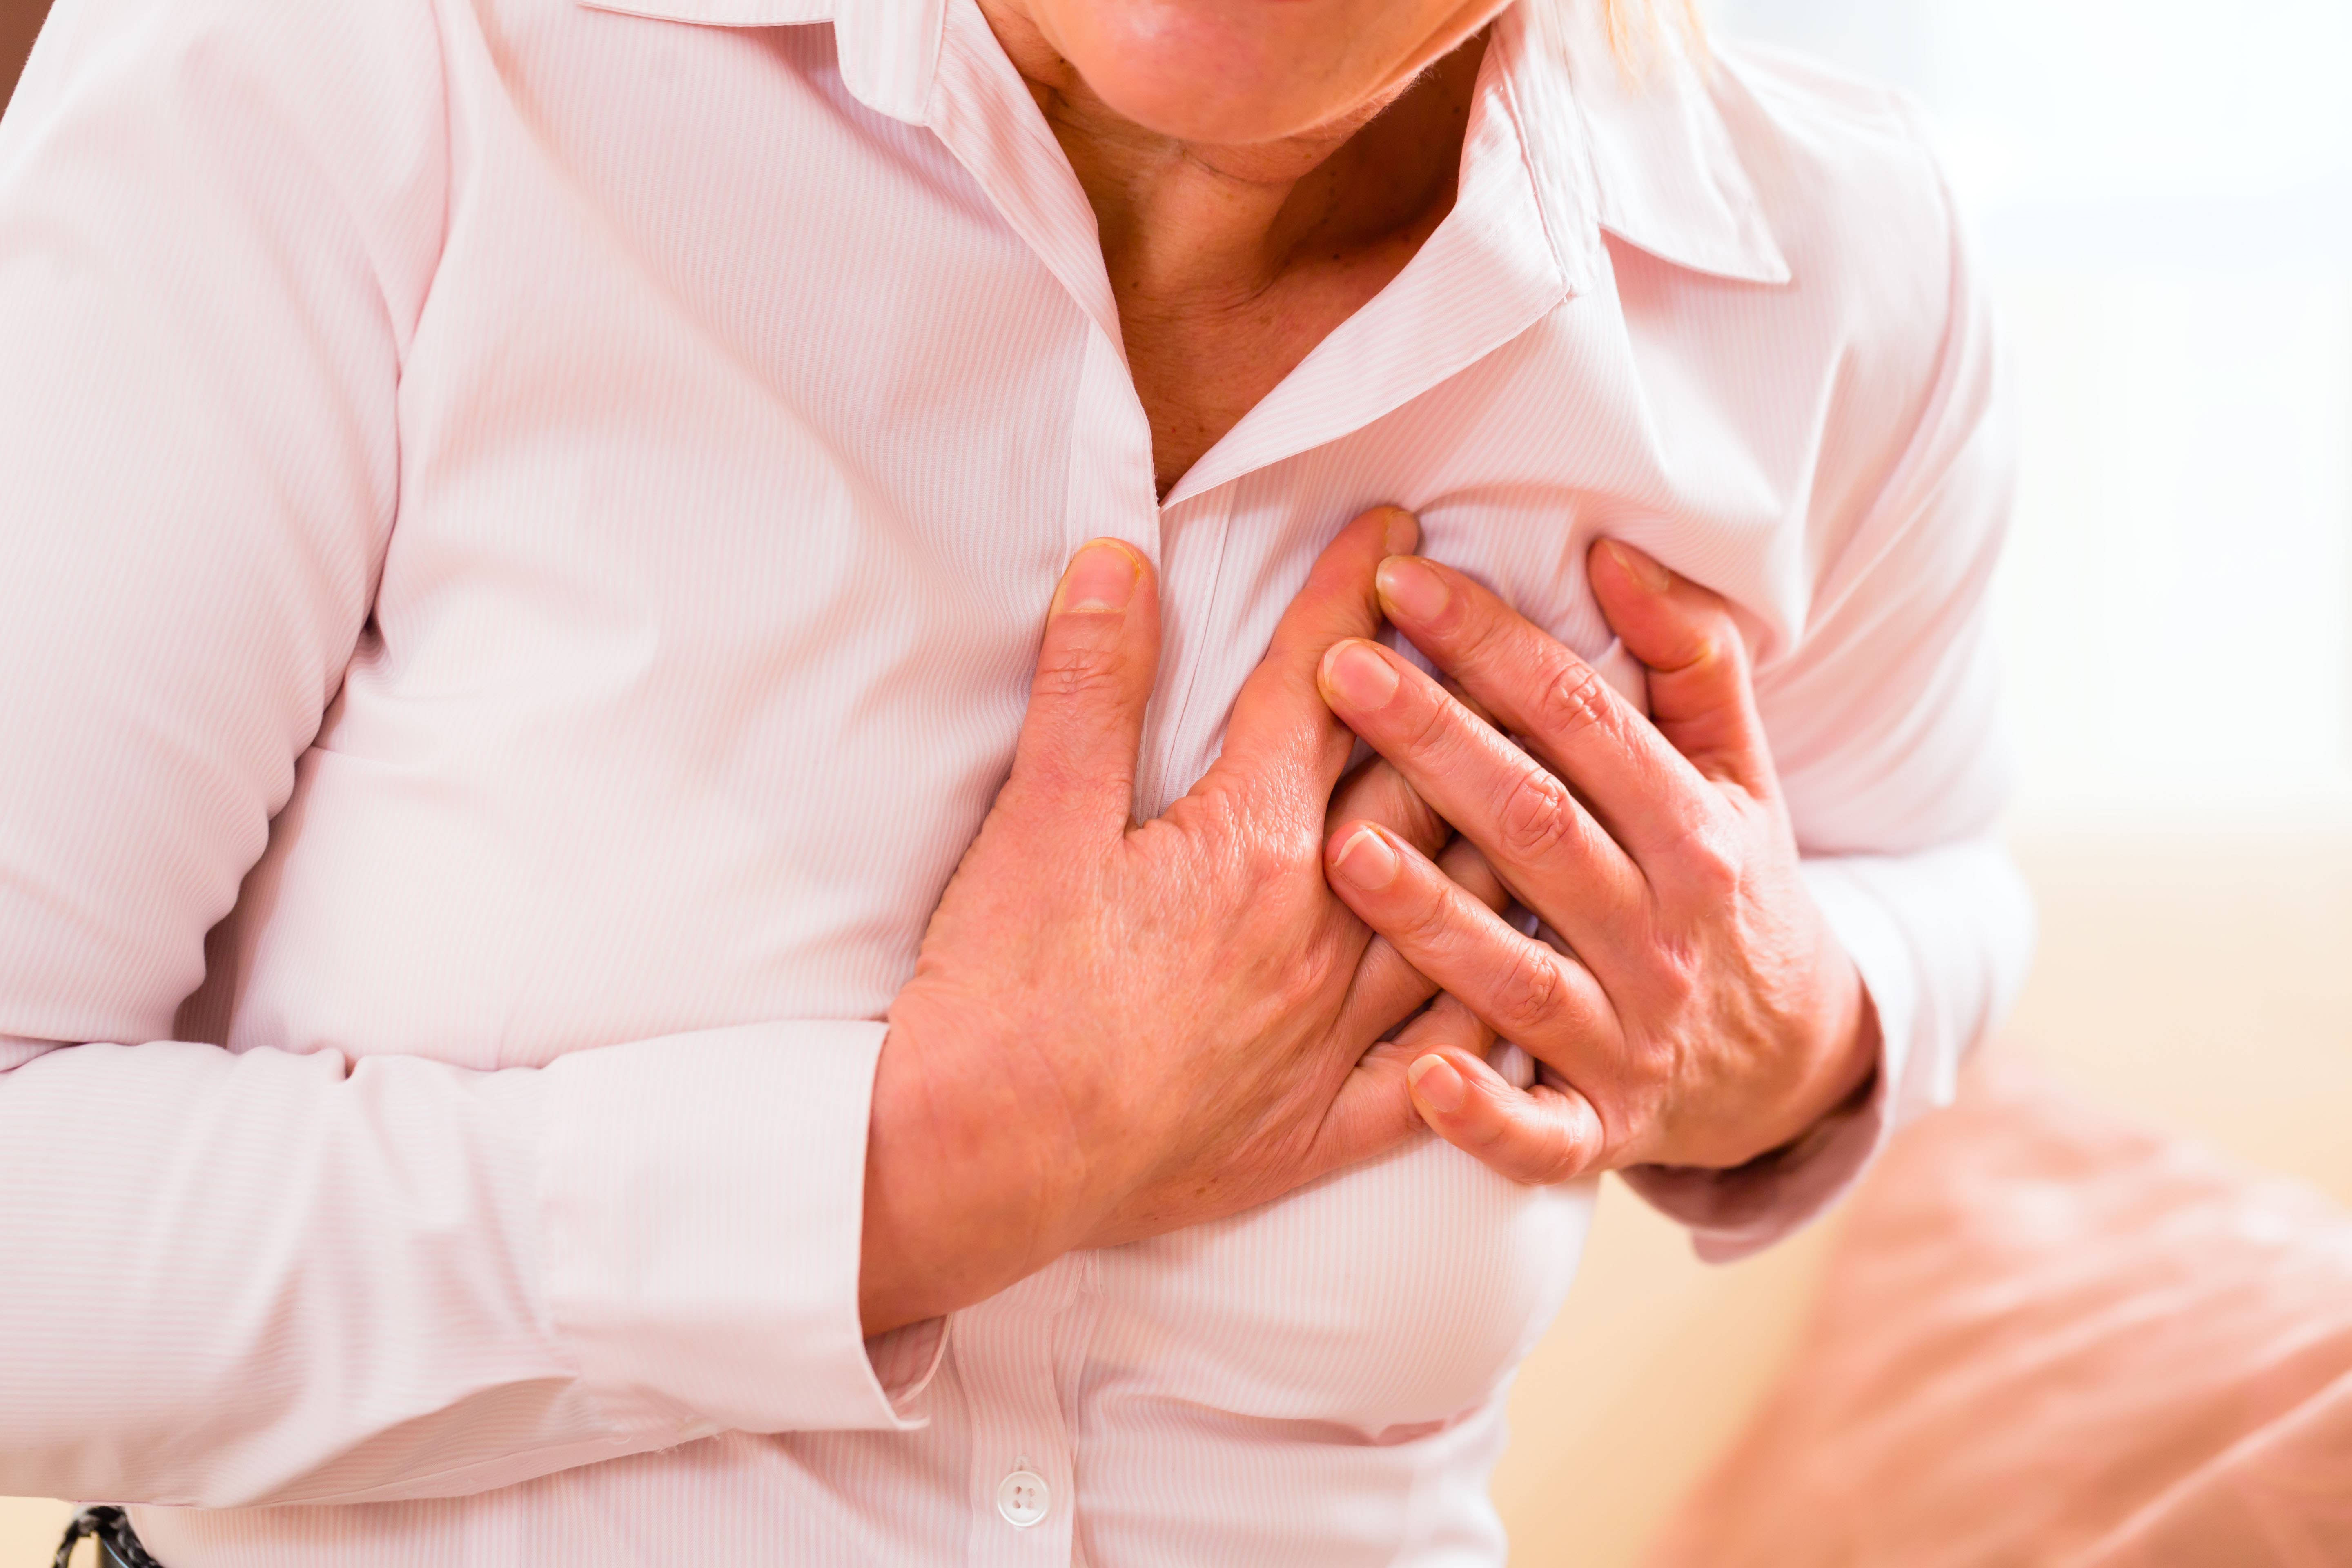 There are around 1.4 million heart attack survivors in the UK at risk of further serious health conditions’